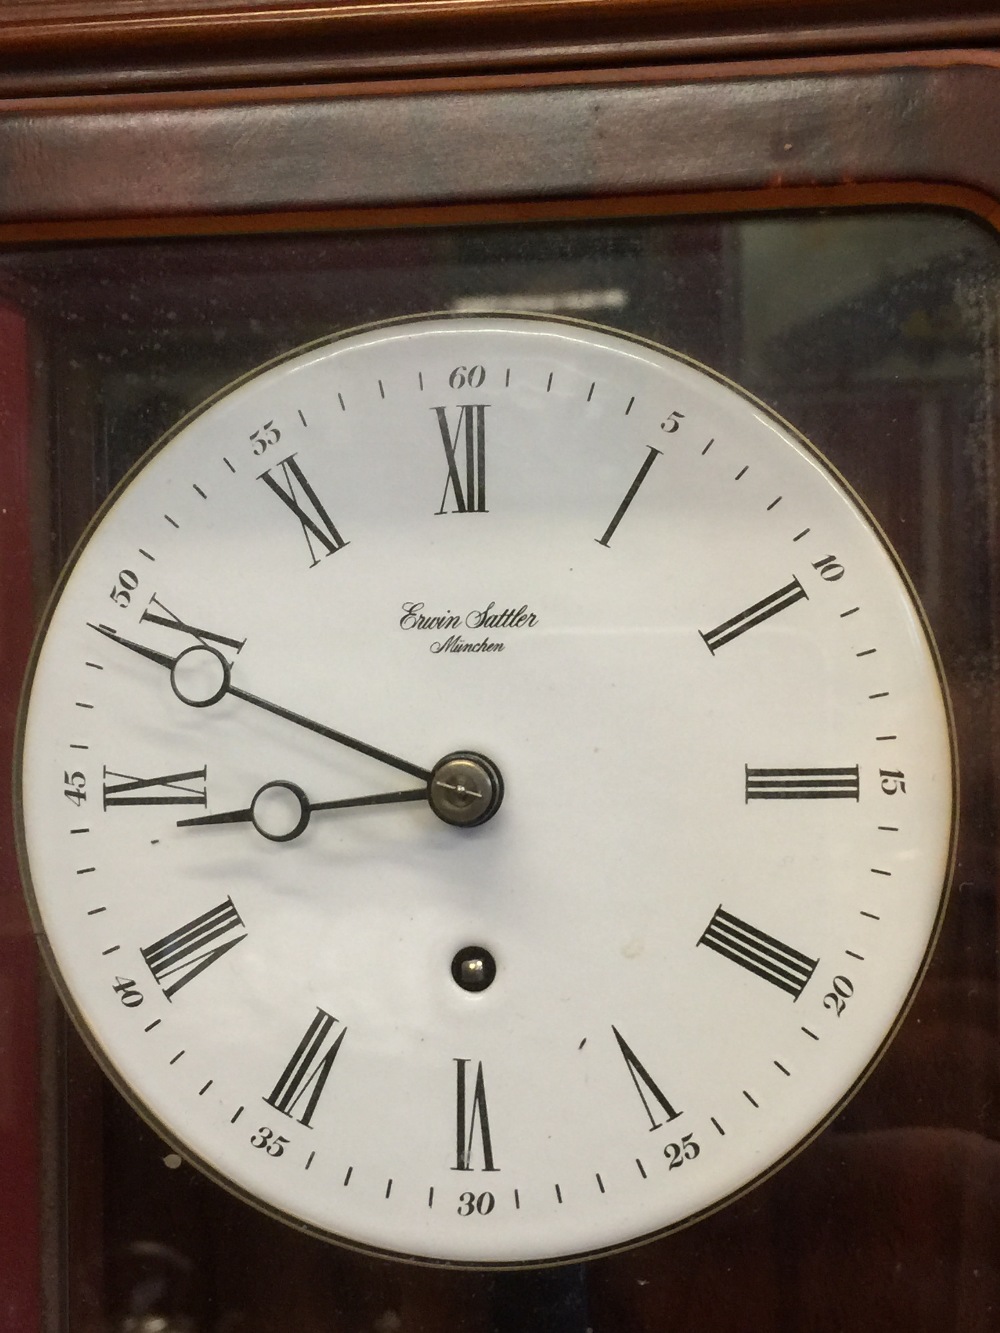 20th cent. Wall clock, mahogany and glass case. Erwin Sattler, Manchester. 6ins. x 24ins. x 3½ins. - Image 2 of 2